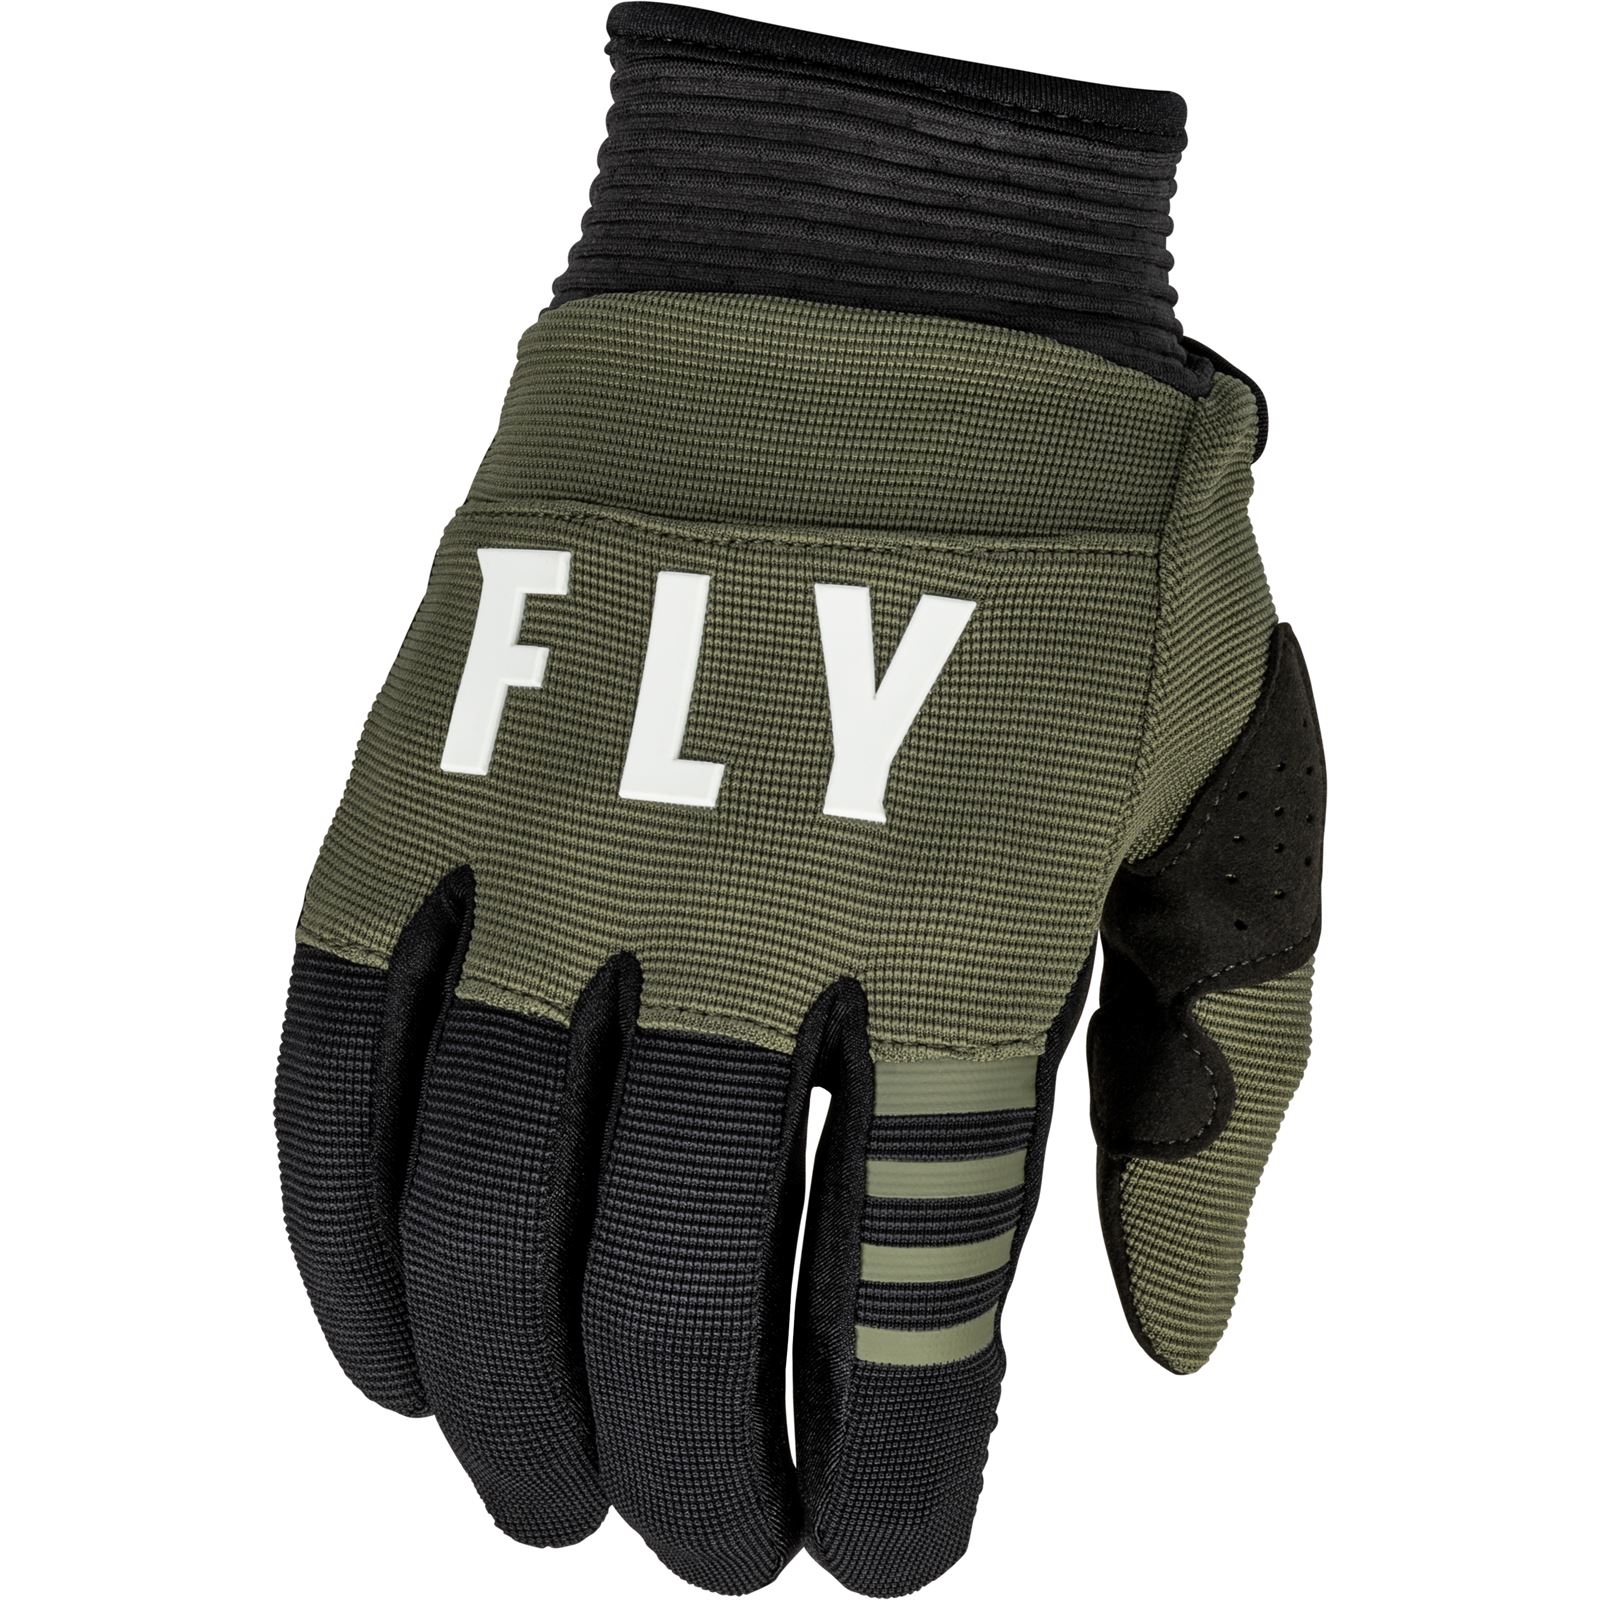 Fly Racing F-16 Gloves - Olive Green/Black - Small